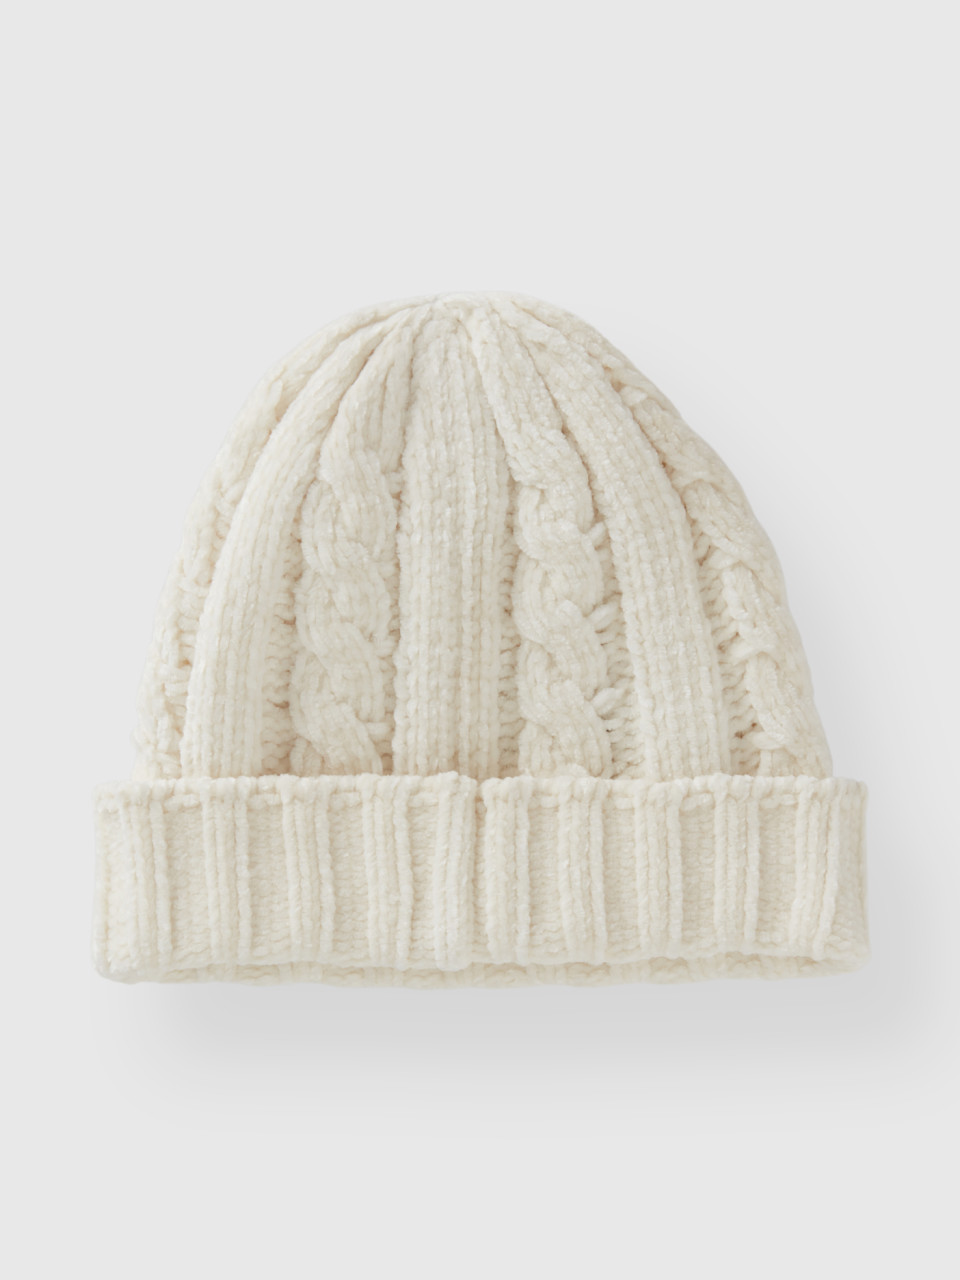 Benetton, Chenille Hat With Cable Knit, Creamy White, Kids